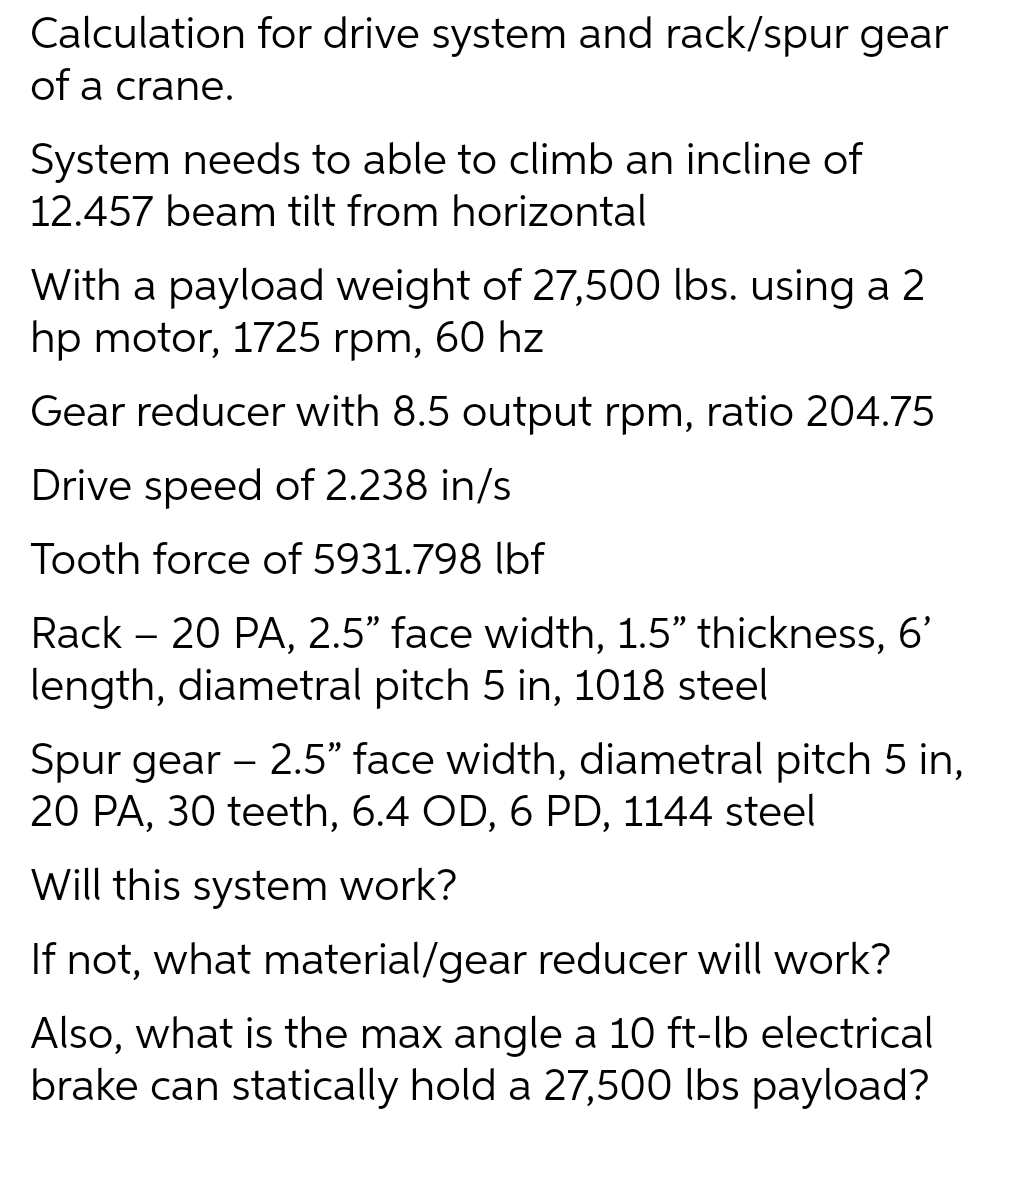 Calculation for drive system and rack/spur gear
of a crane.
System needs to able to climb an incline of
12.457 beam tilt from horizontal
With a payload weight of 27,500 lbs. using a 2
hp motor, 1725 rpm, 60 hz
Gear reducer with 8.5 output rpm, ratio 204.75
Drive speed of 2.238 in/s
Tooth force of 5931.798 lbf
Rack - 20 PA, 2.5" face width, 1.5" thickness, 6'
length, diametral pitch 5 in, 1018 steel
Spur gear - 2.5" face width, diametral pitch 5 in,
20 PA, 30 teeth, 6.4 OD, 6 PD, 1144 steel
Will this system work?
If not, what material/gear reducer will work?
Also, what is the max angle a 10 ft-lb electrical
brake can statically hold a 27,500 lbs payload?